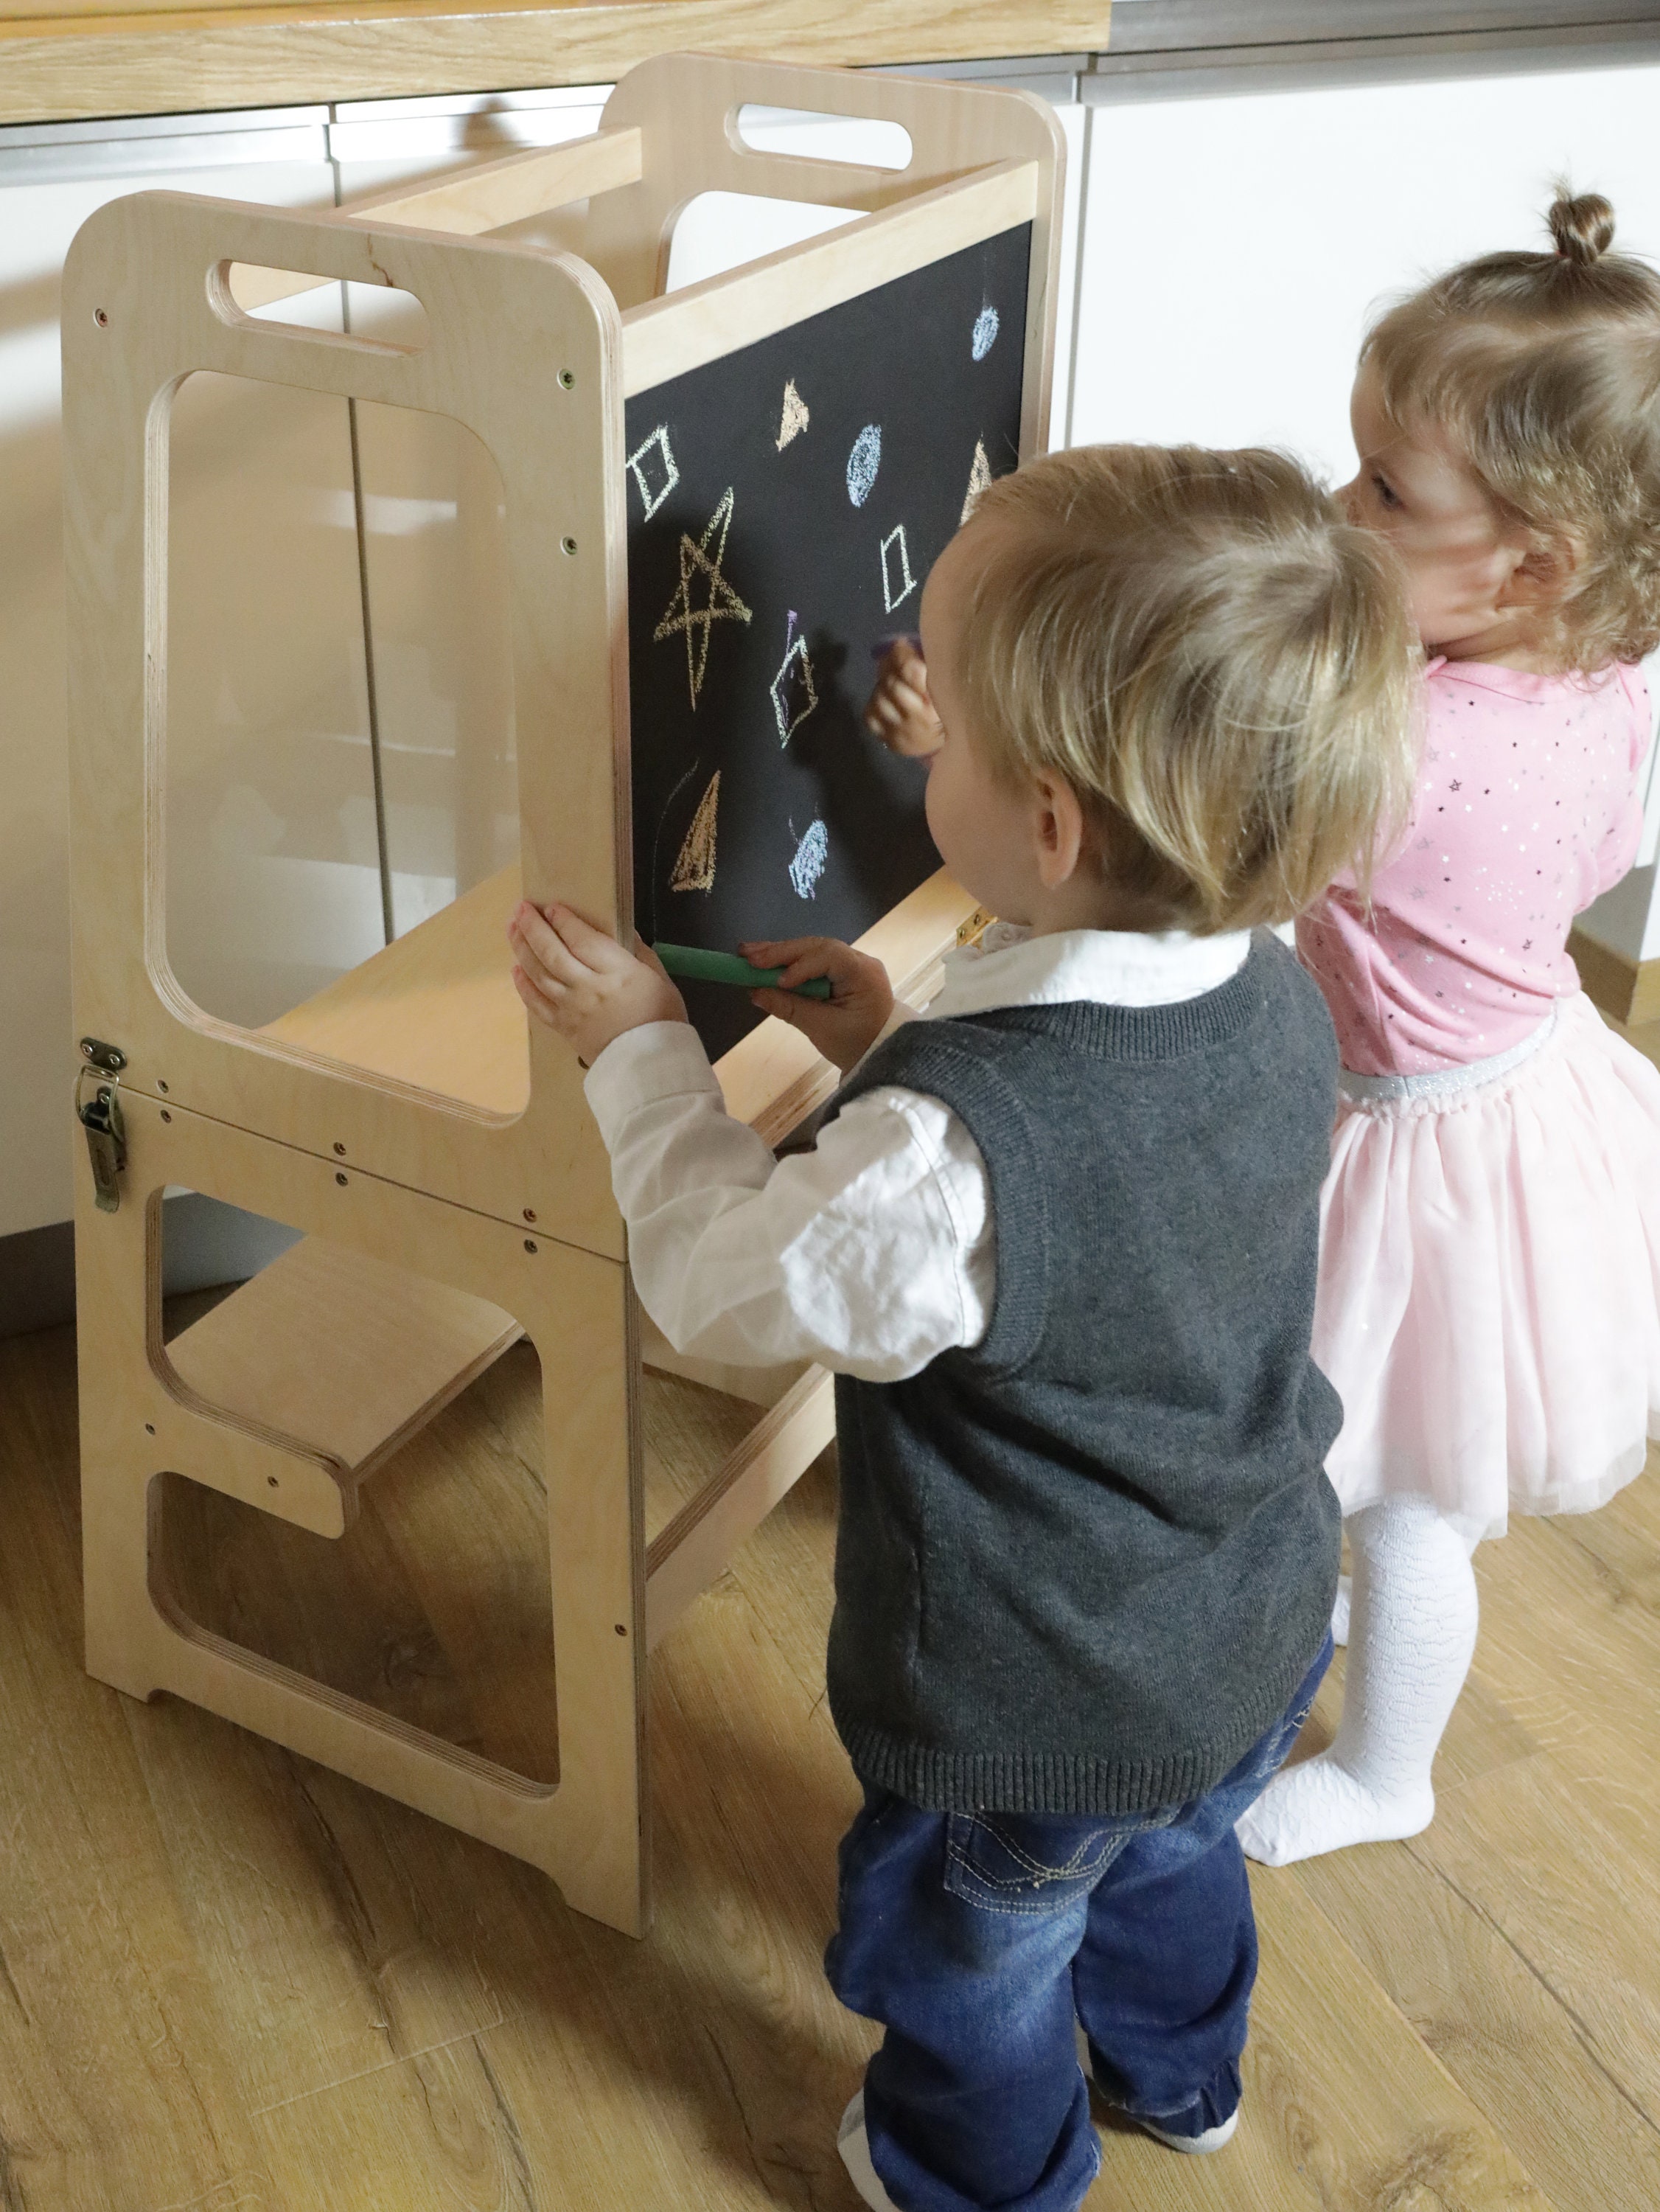 The Folding Learning Tower for Toddlers | Montessori Kitchen Helper - Xiha Toy White + Chalkboard